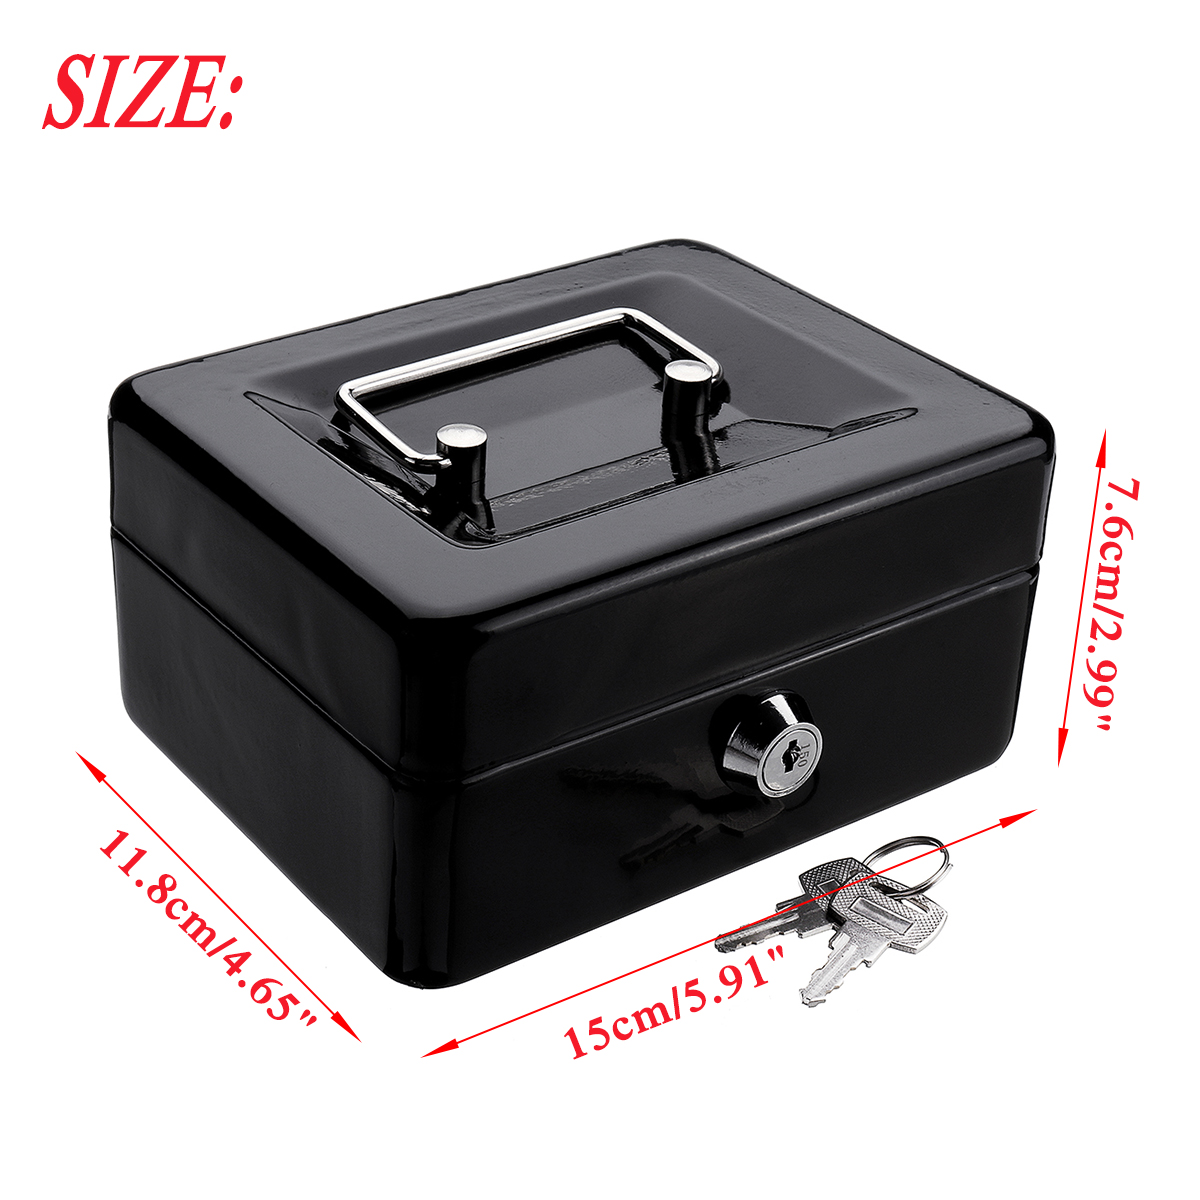 Mini-Portable-Money-Safe-Storage-Case-Black-Sturdy-Metal-With-Coin-Tray-Cash-Carry-Box-1346714-10